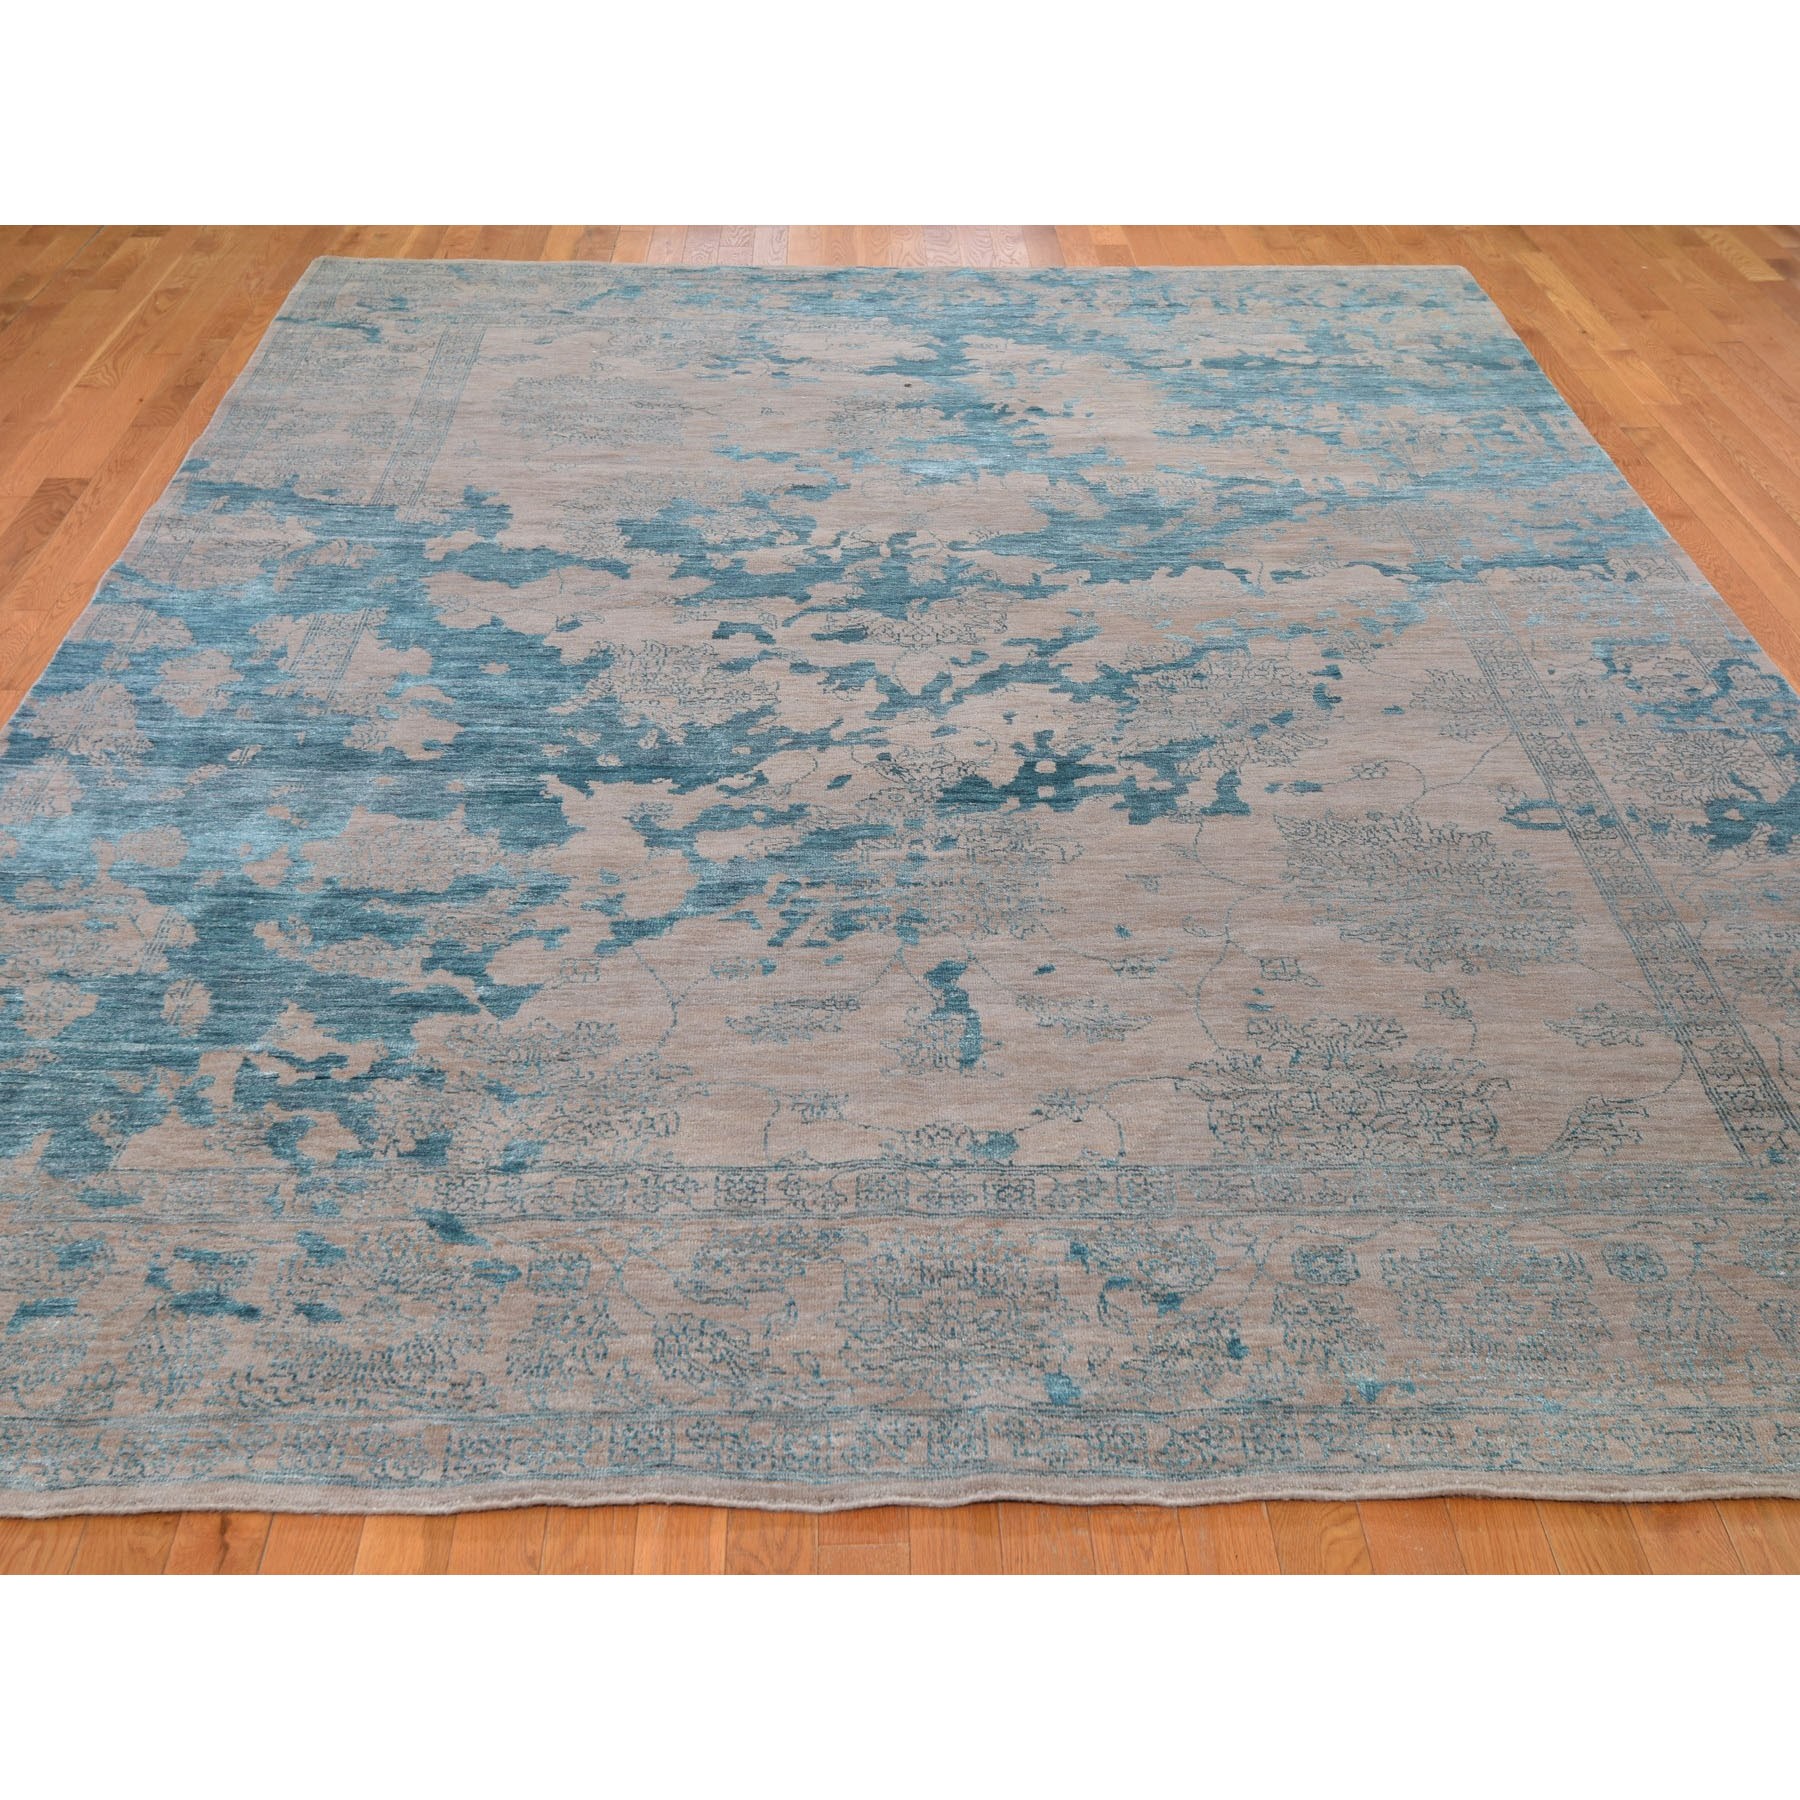 8-10 x12- Aquamarine Tone On Tone Stained Design Hand Knotted Oriental Rug 